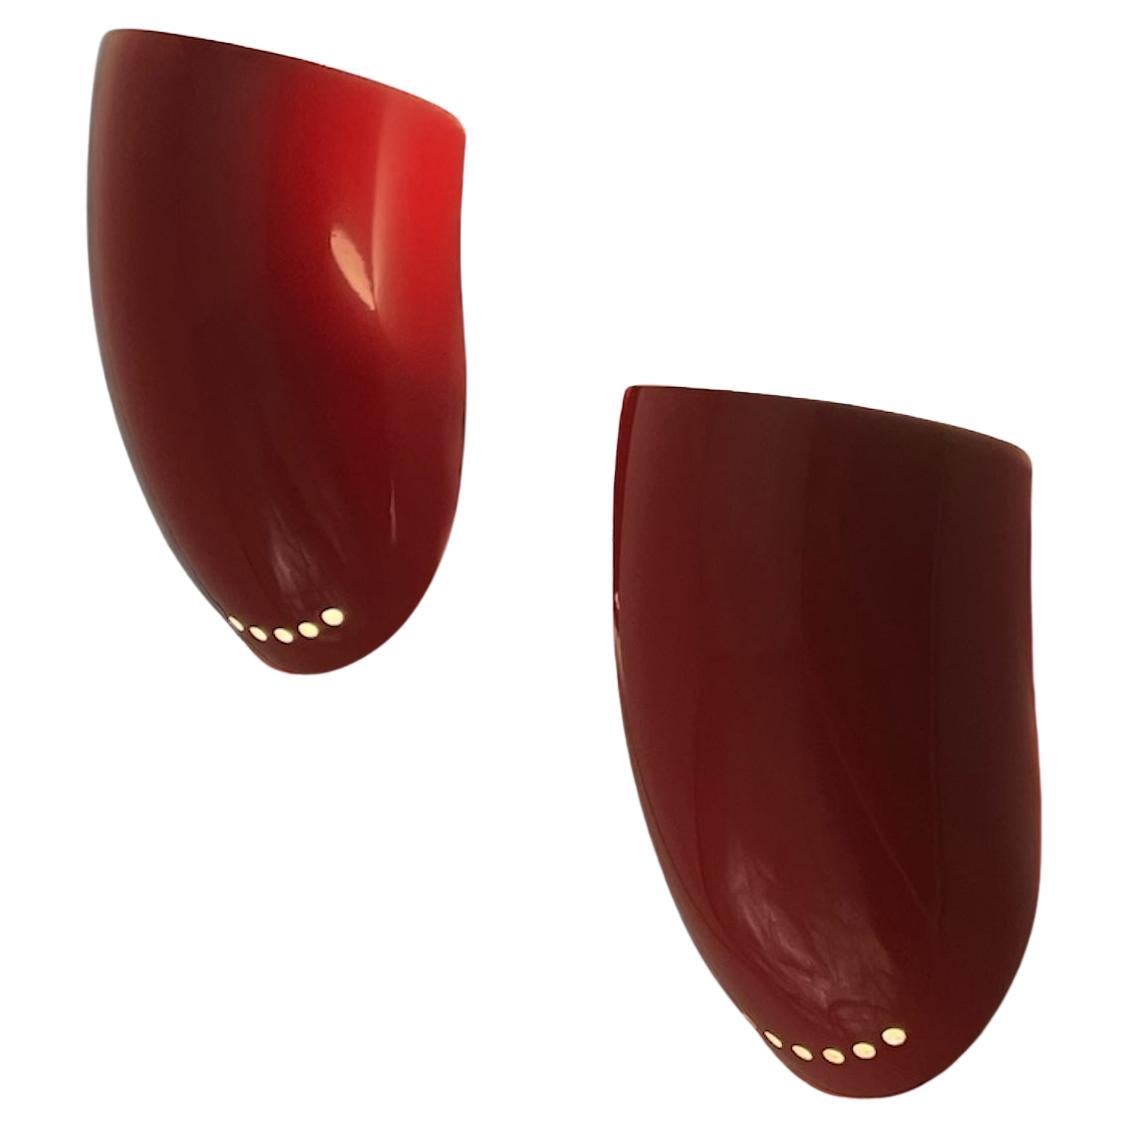 Gomito Wall Lamps by Elio Martinelli for Martinelli Luce in Red, 1970s, Set of 2 For Sale